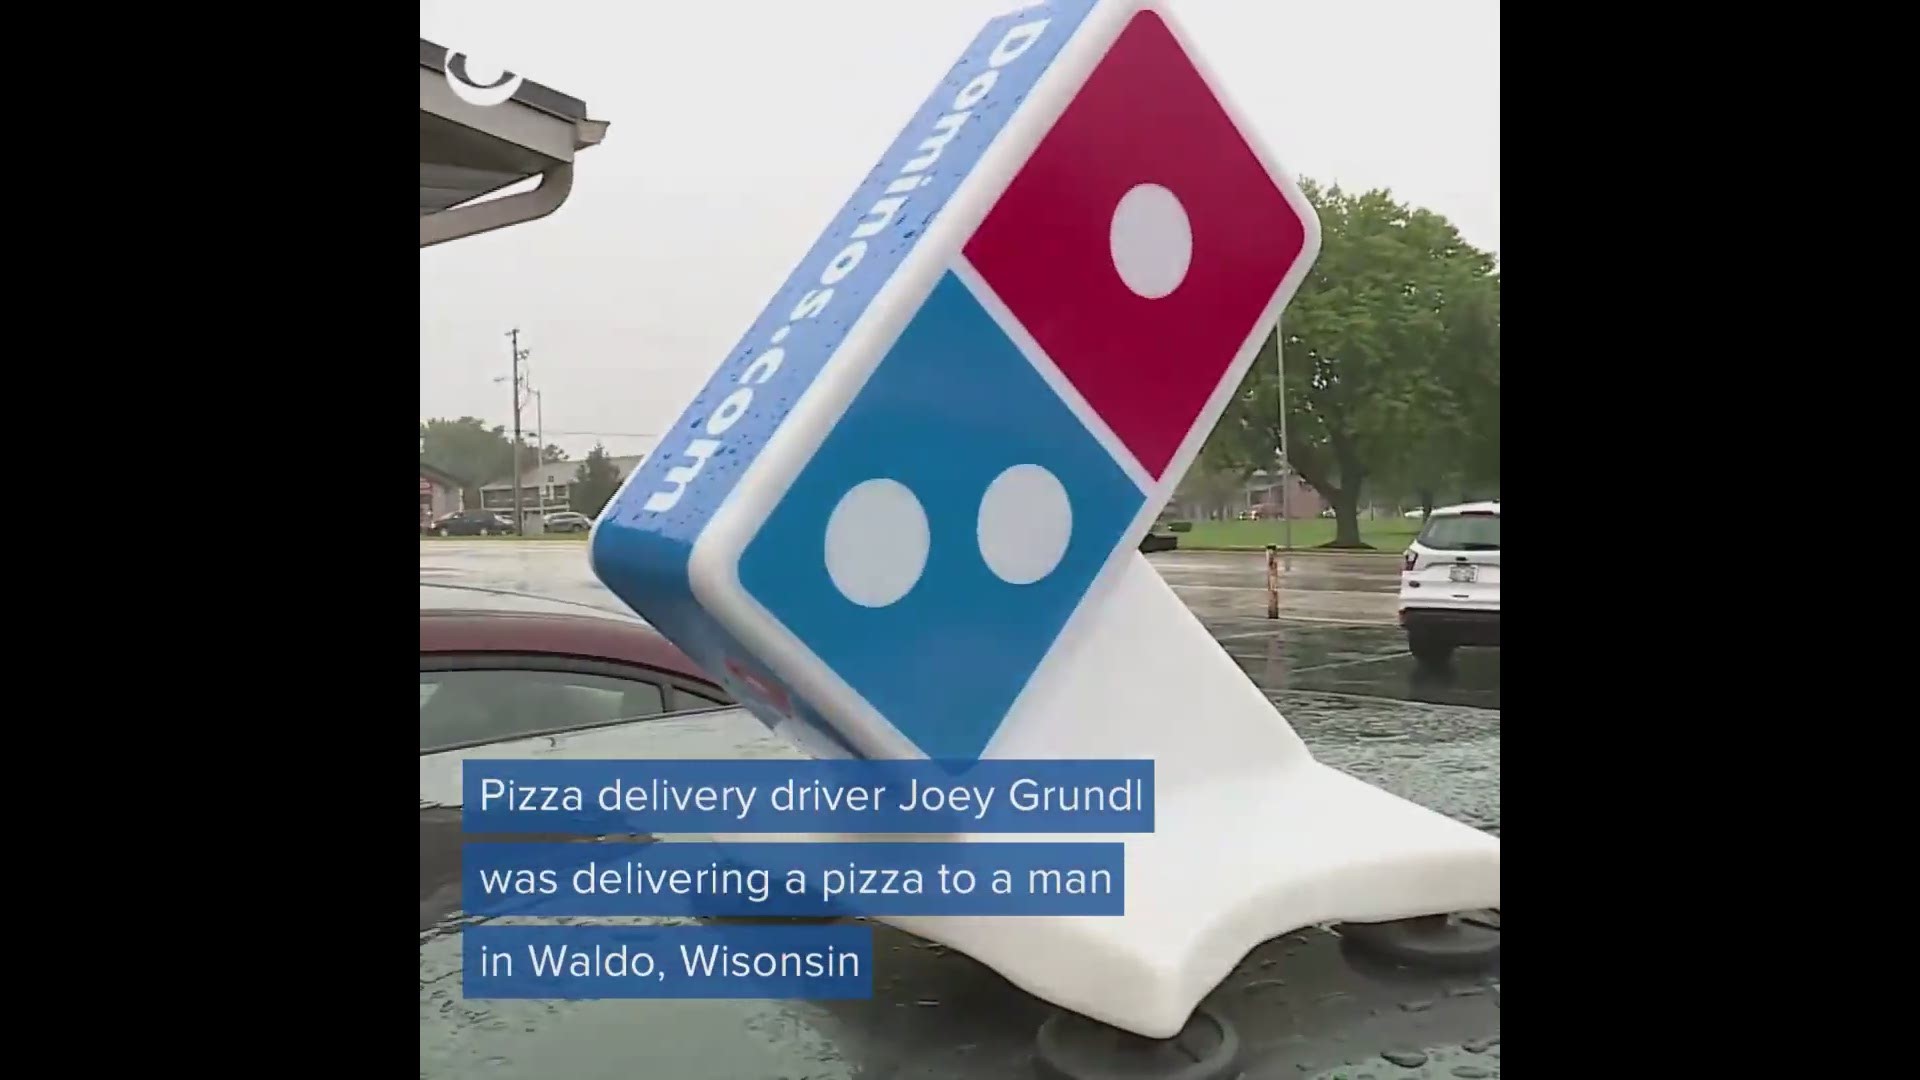 The delivery driver said he arrived at a home Thursday in Sheboygan County, Wisconsin, and was greeted by a couple at the door. While the man was paying for the pizza, the woman, who had a black eye, mouthed "help me" and "call the police" to the driver,